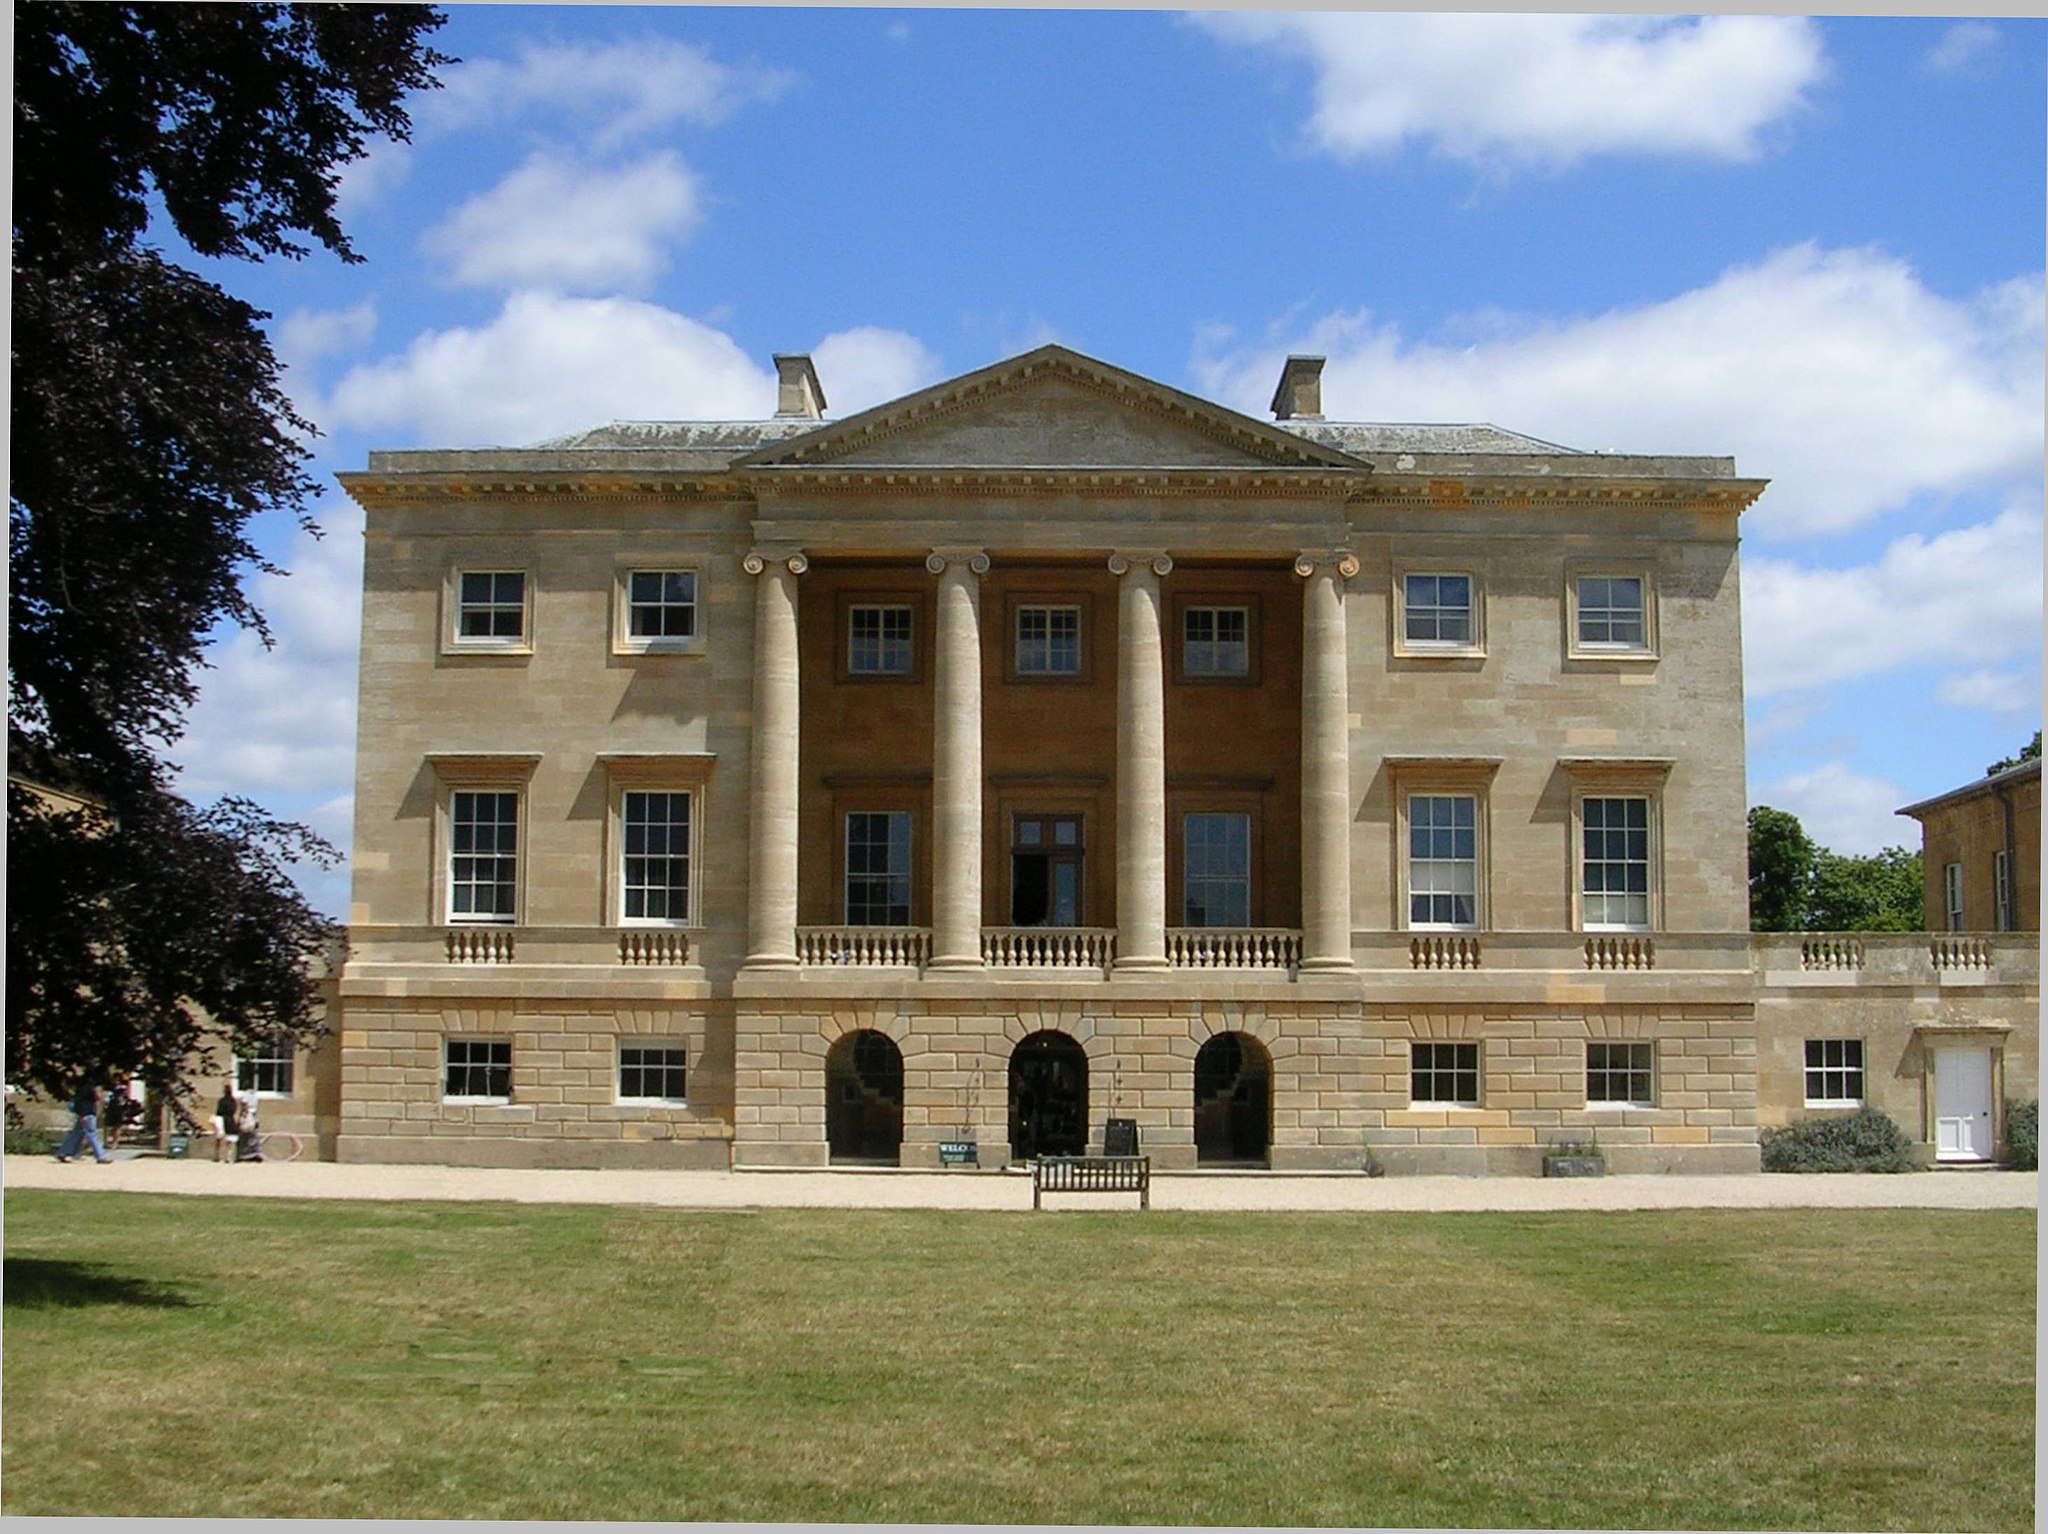 Picture of Basildon Park - Events in Reading